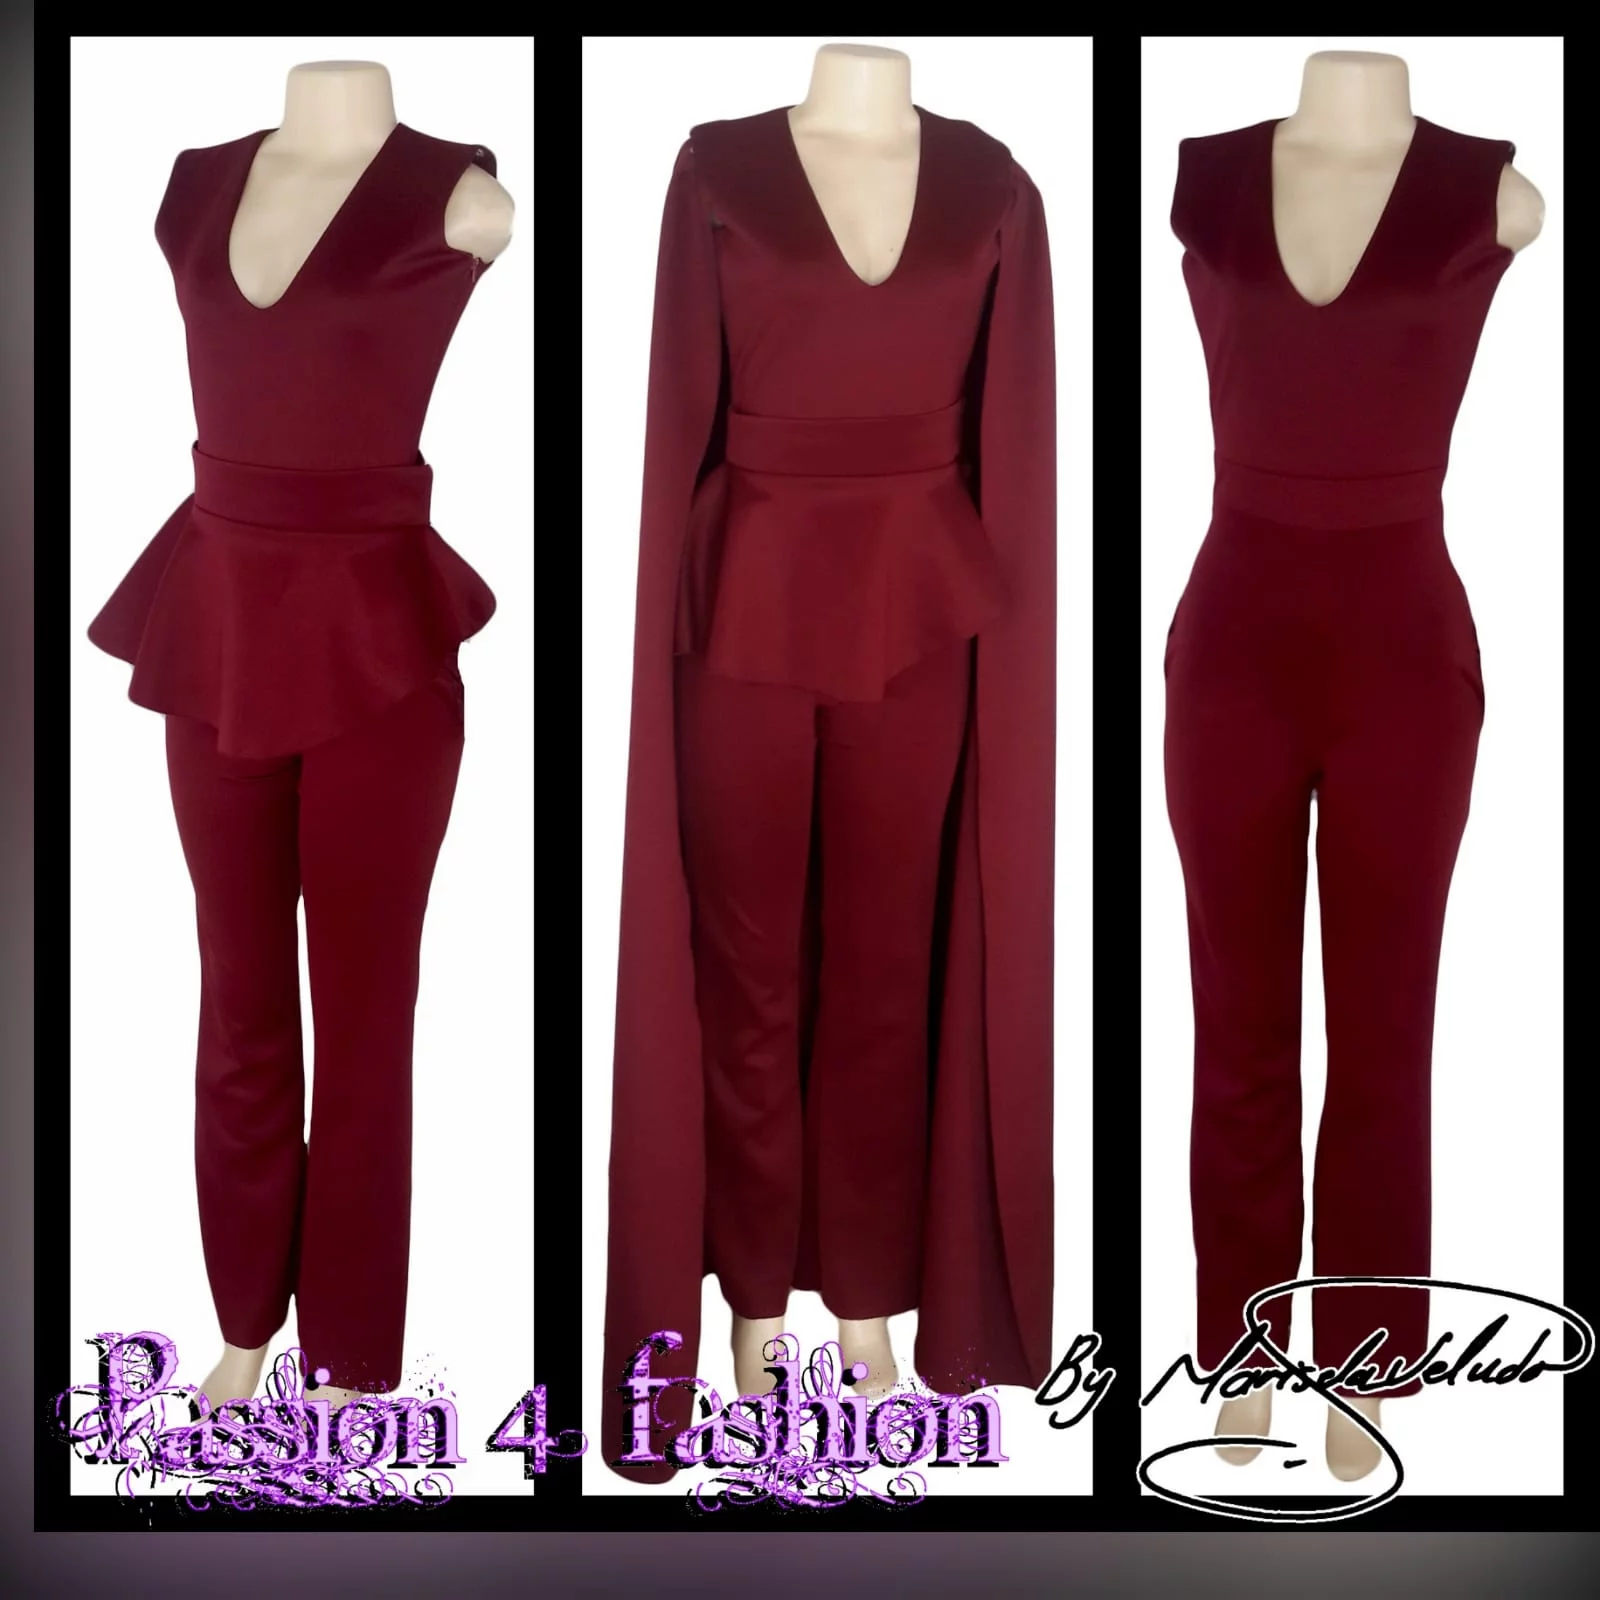 3 piece burgundy evening outfit 5 3 piece burgundy evening outfit. Bodysuit with a v neckline, with a removable peplum belt. With a removable shoulder cape